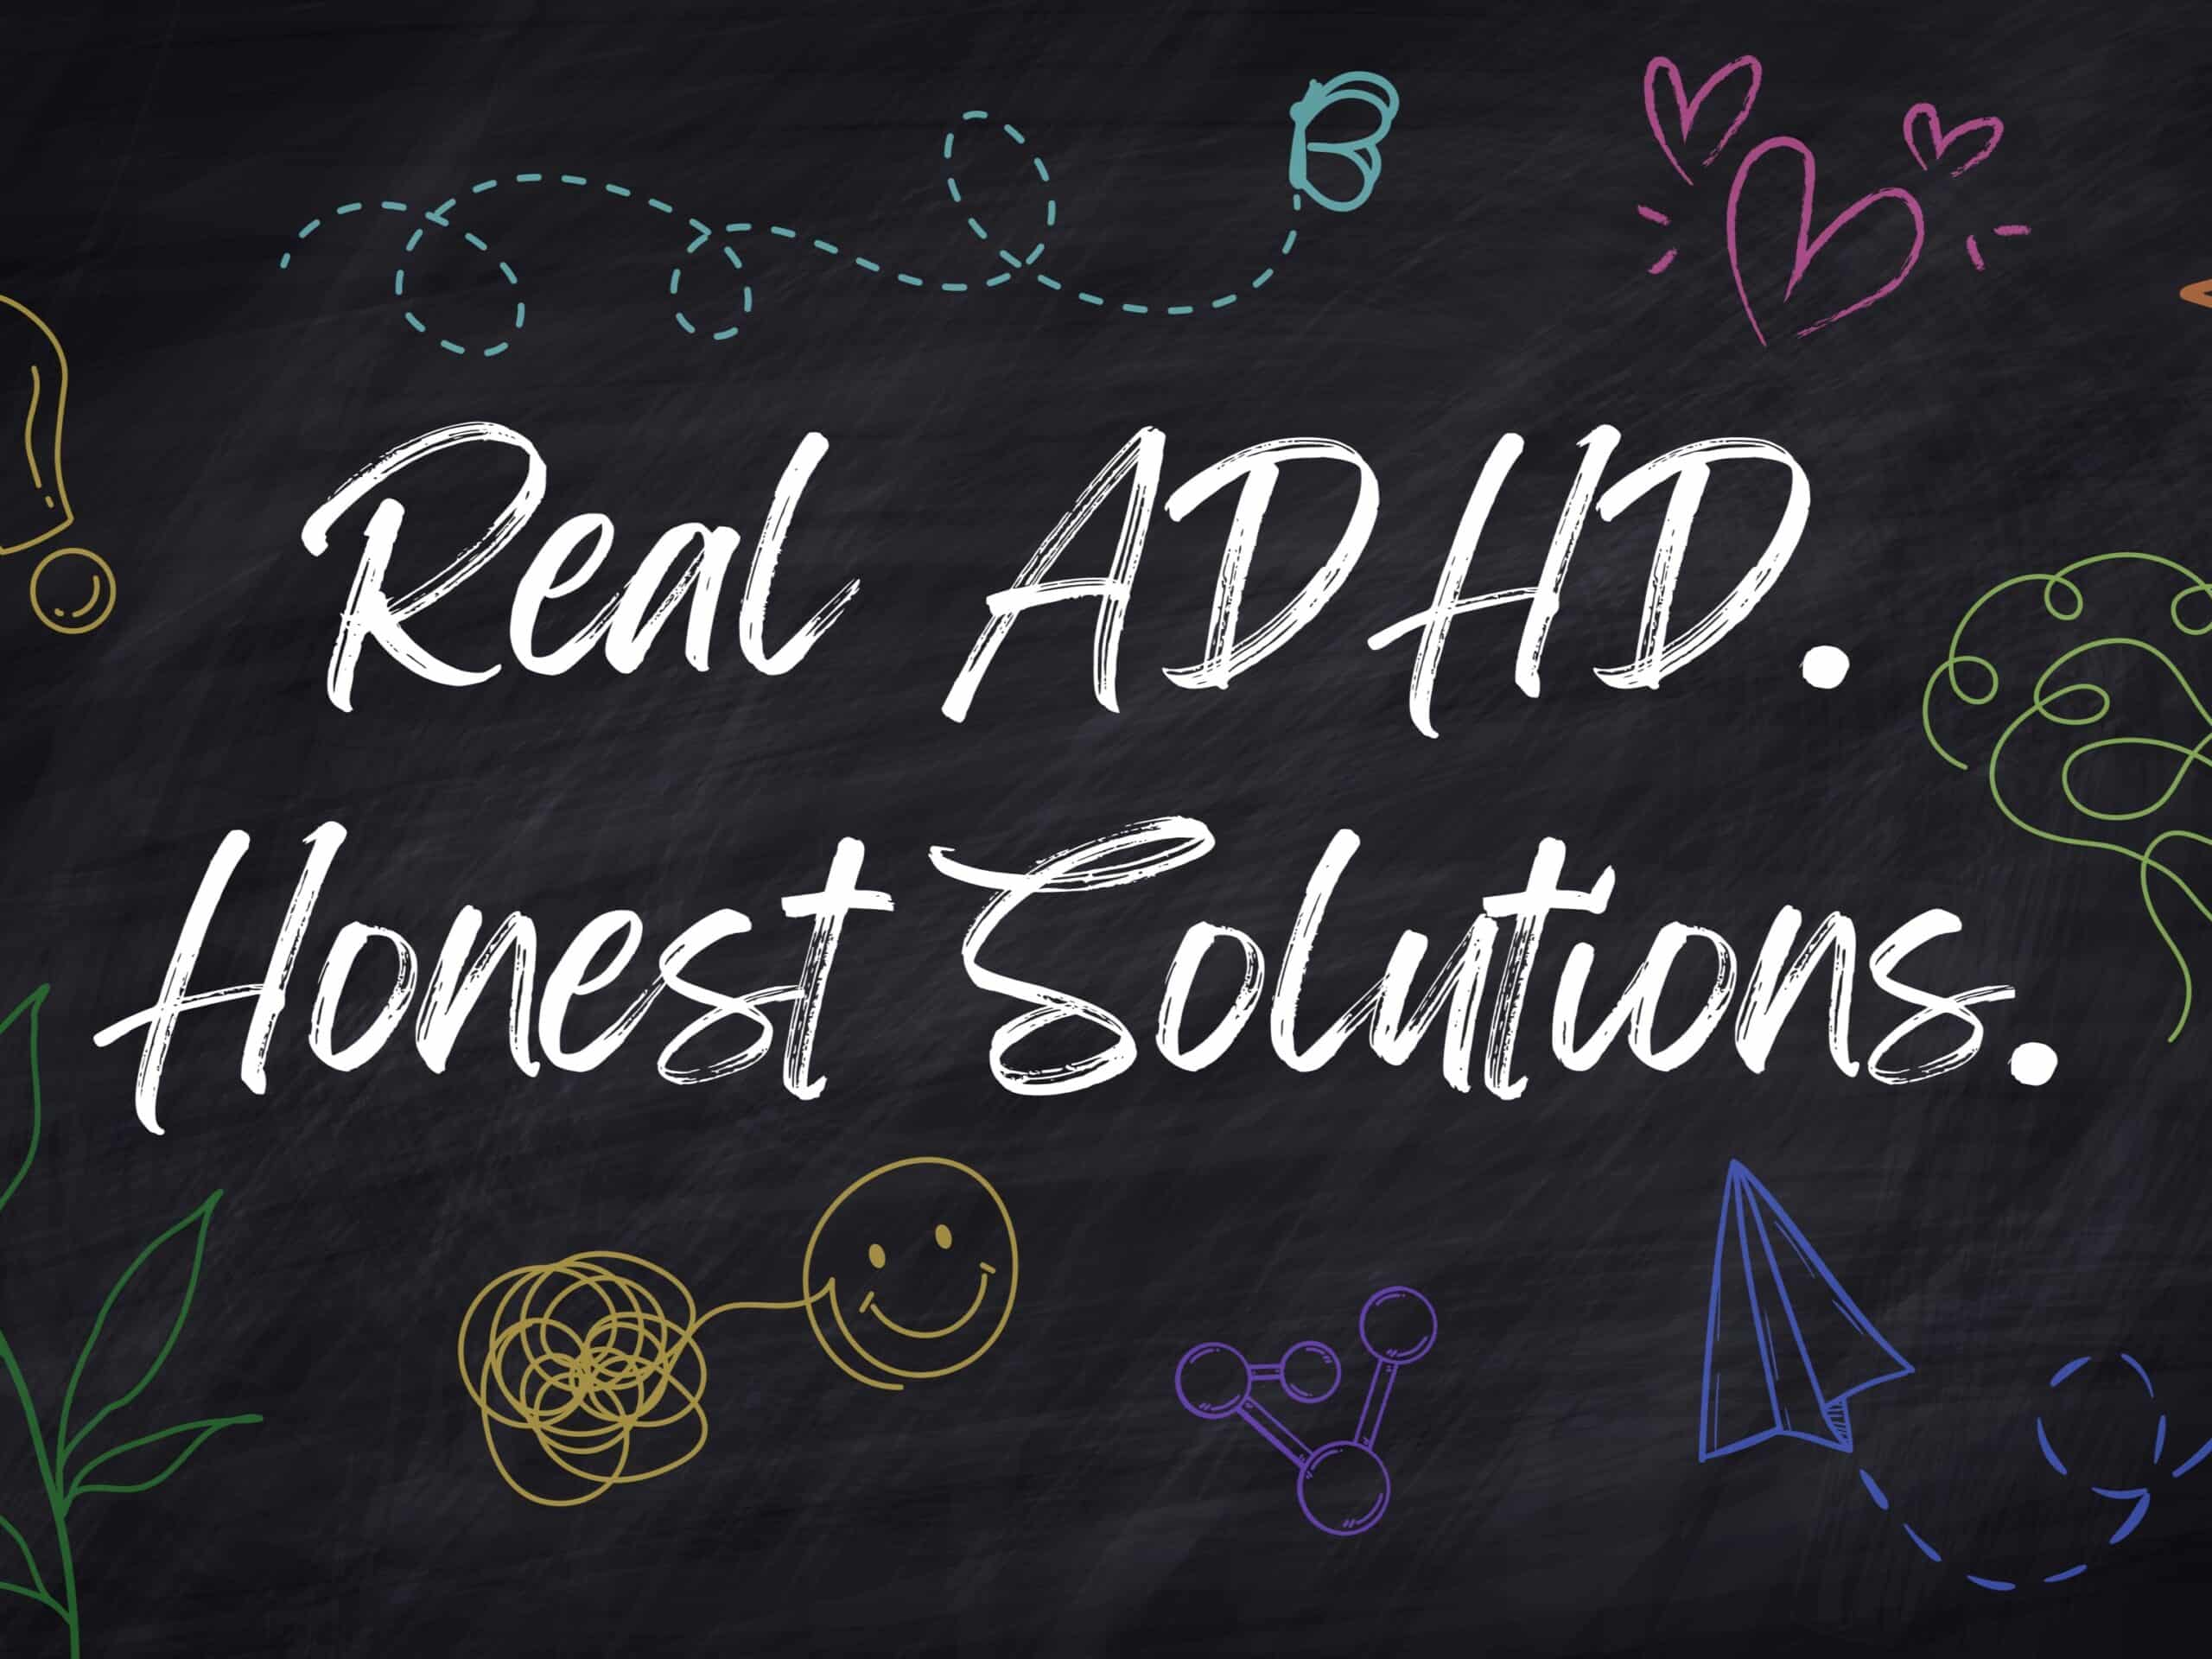 The tagline for Honestly ADHD -"Real ADHD. Honest Solutions." on a chalkboard with doodles around it.